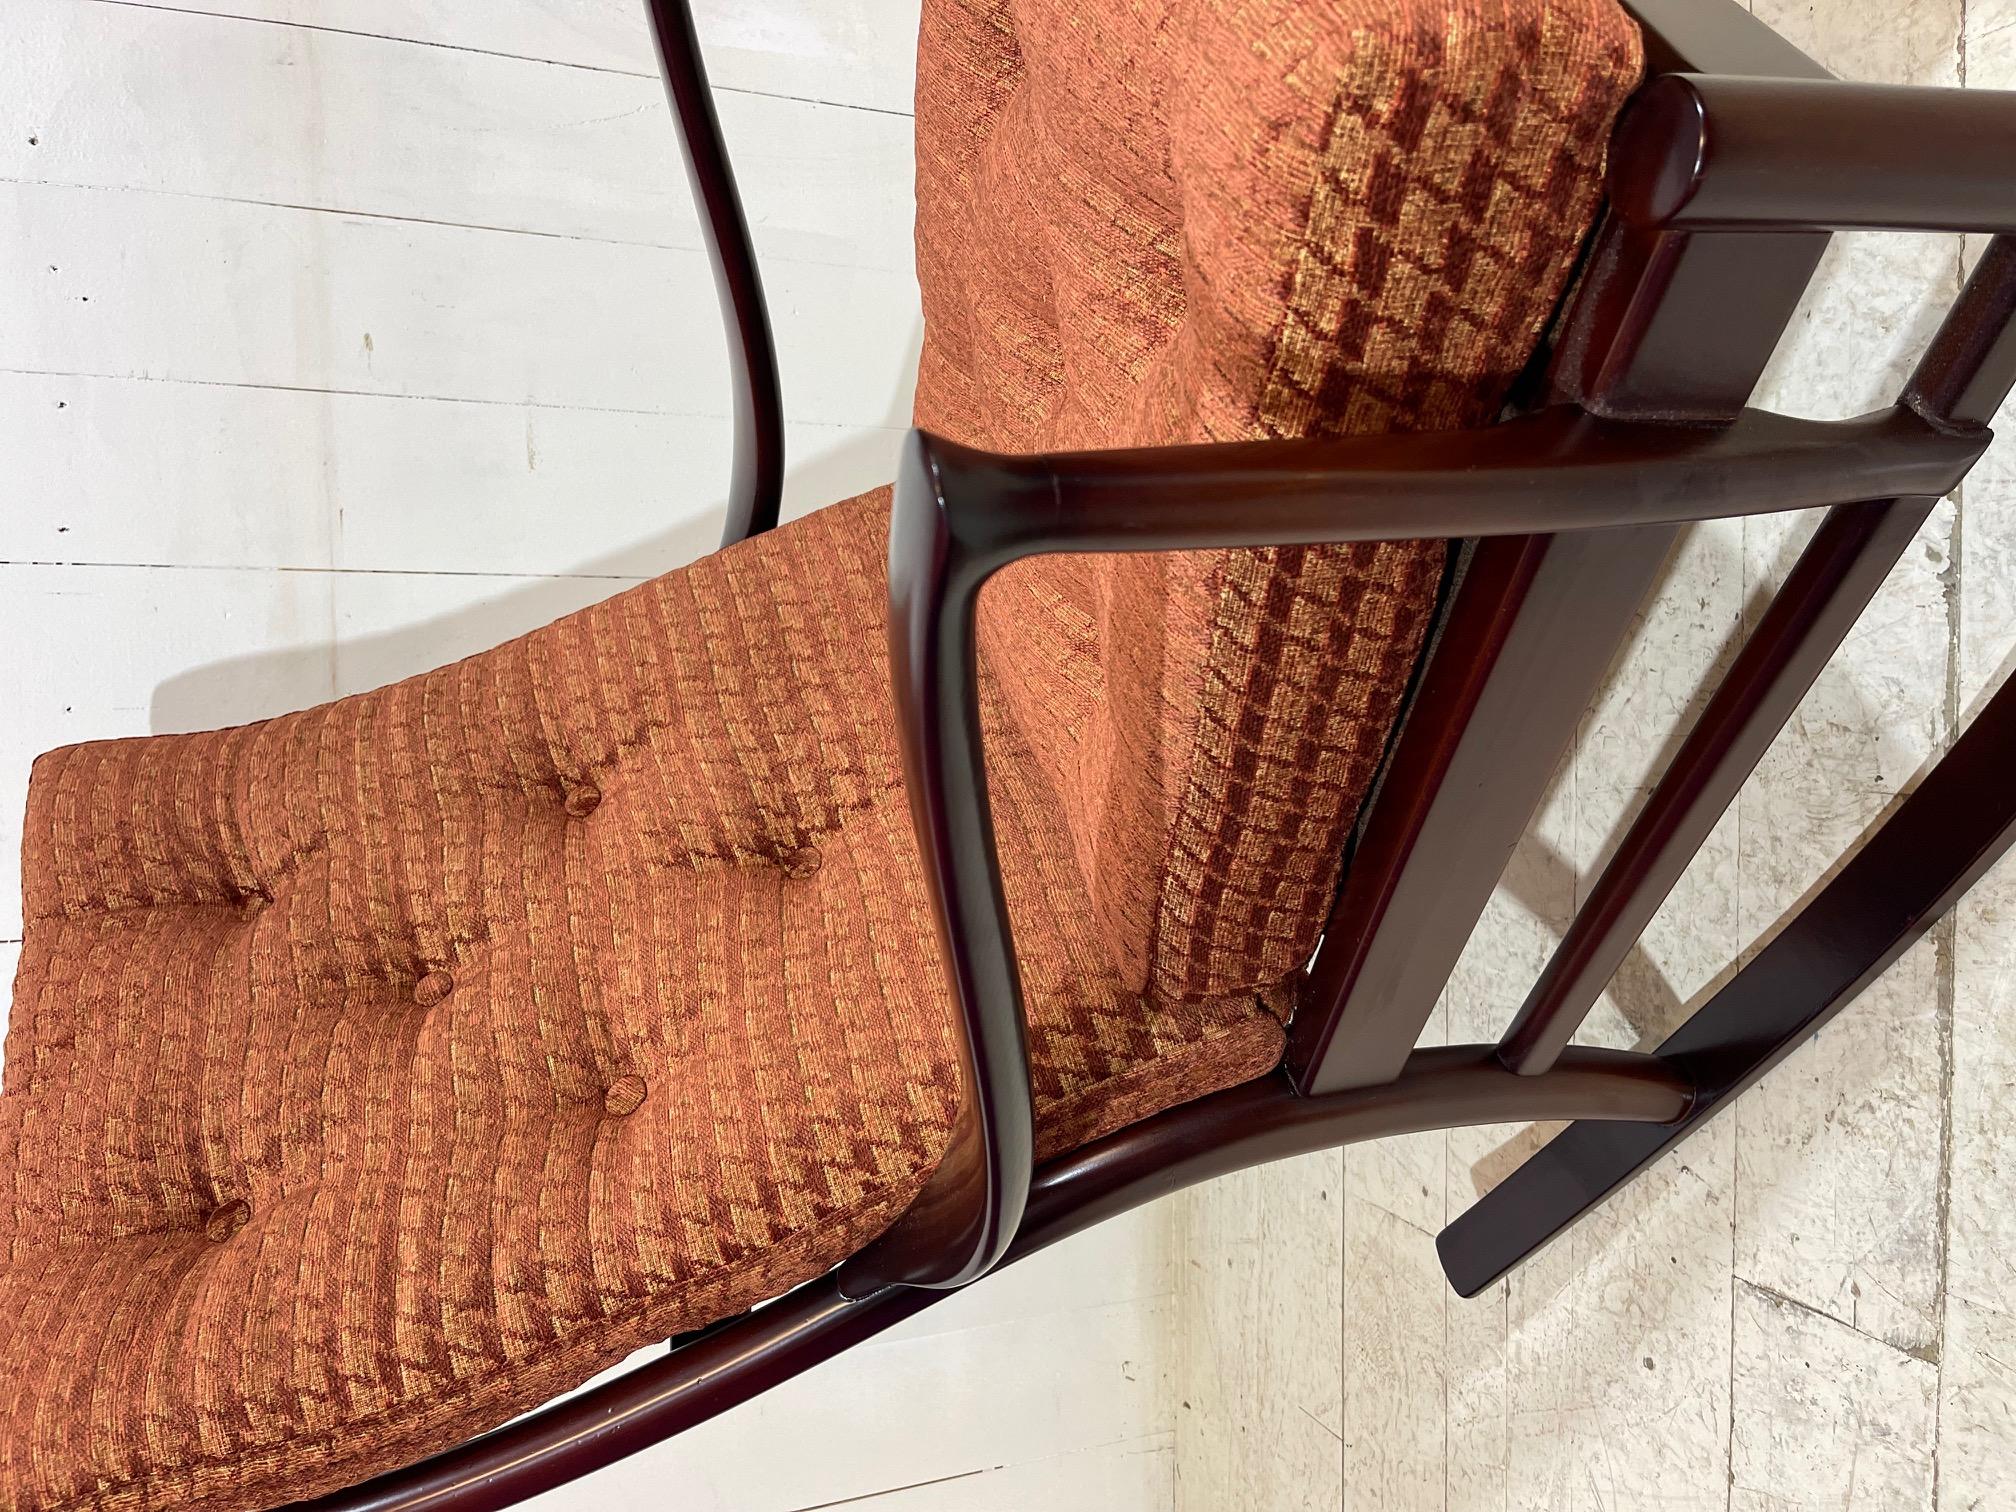 Embark on a journey through mid-century elegance with The Rare Chair Company's exclusive offering – the exquisitely restored Mid Century Parker Knoll Rocking Chair. A masterpiece from the past, this iconic piece features a walnut lacquered frame